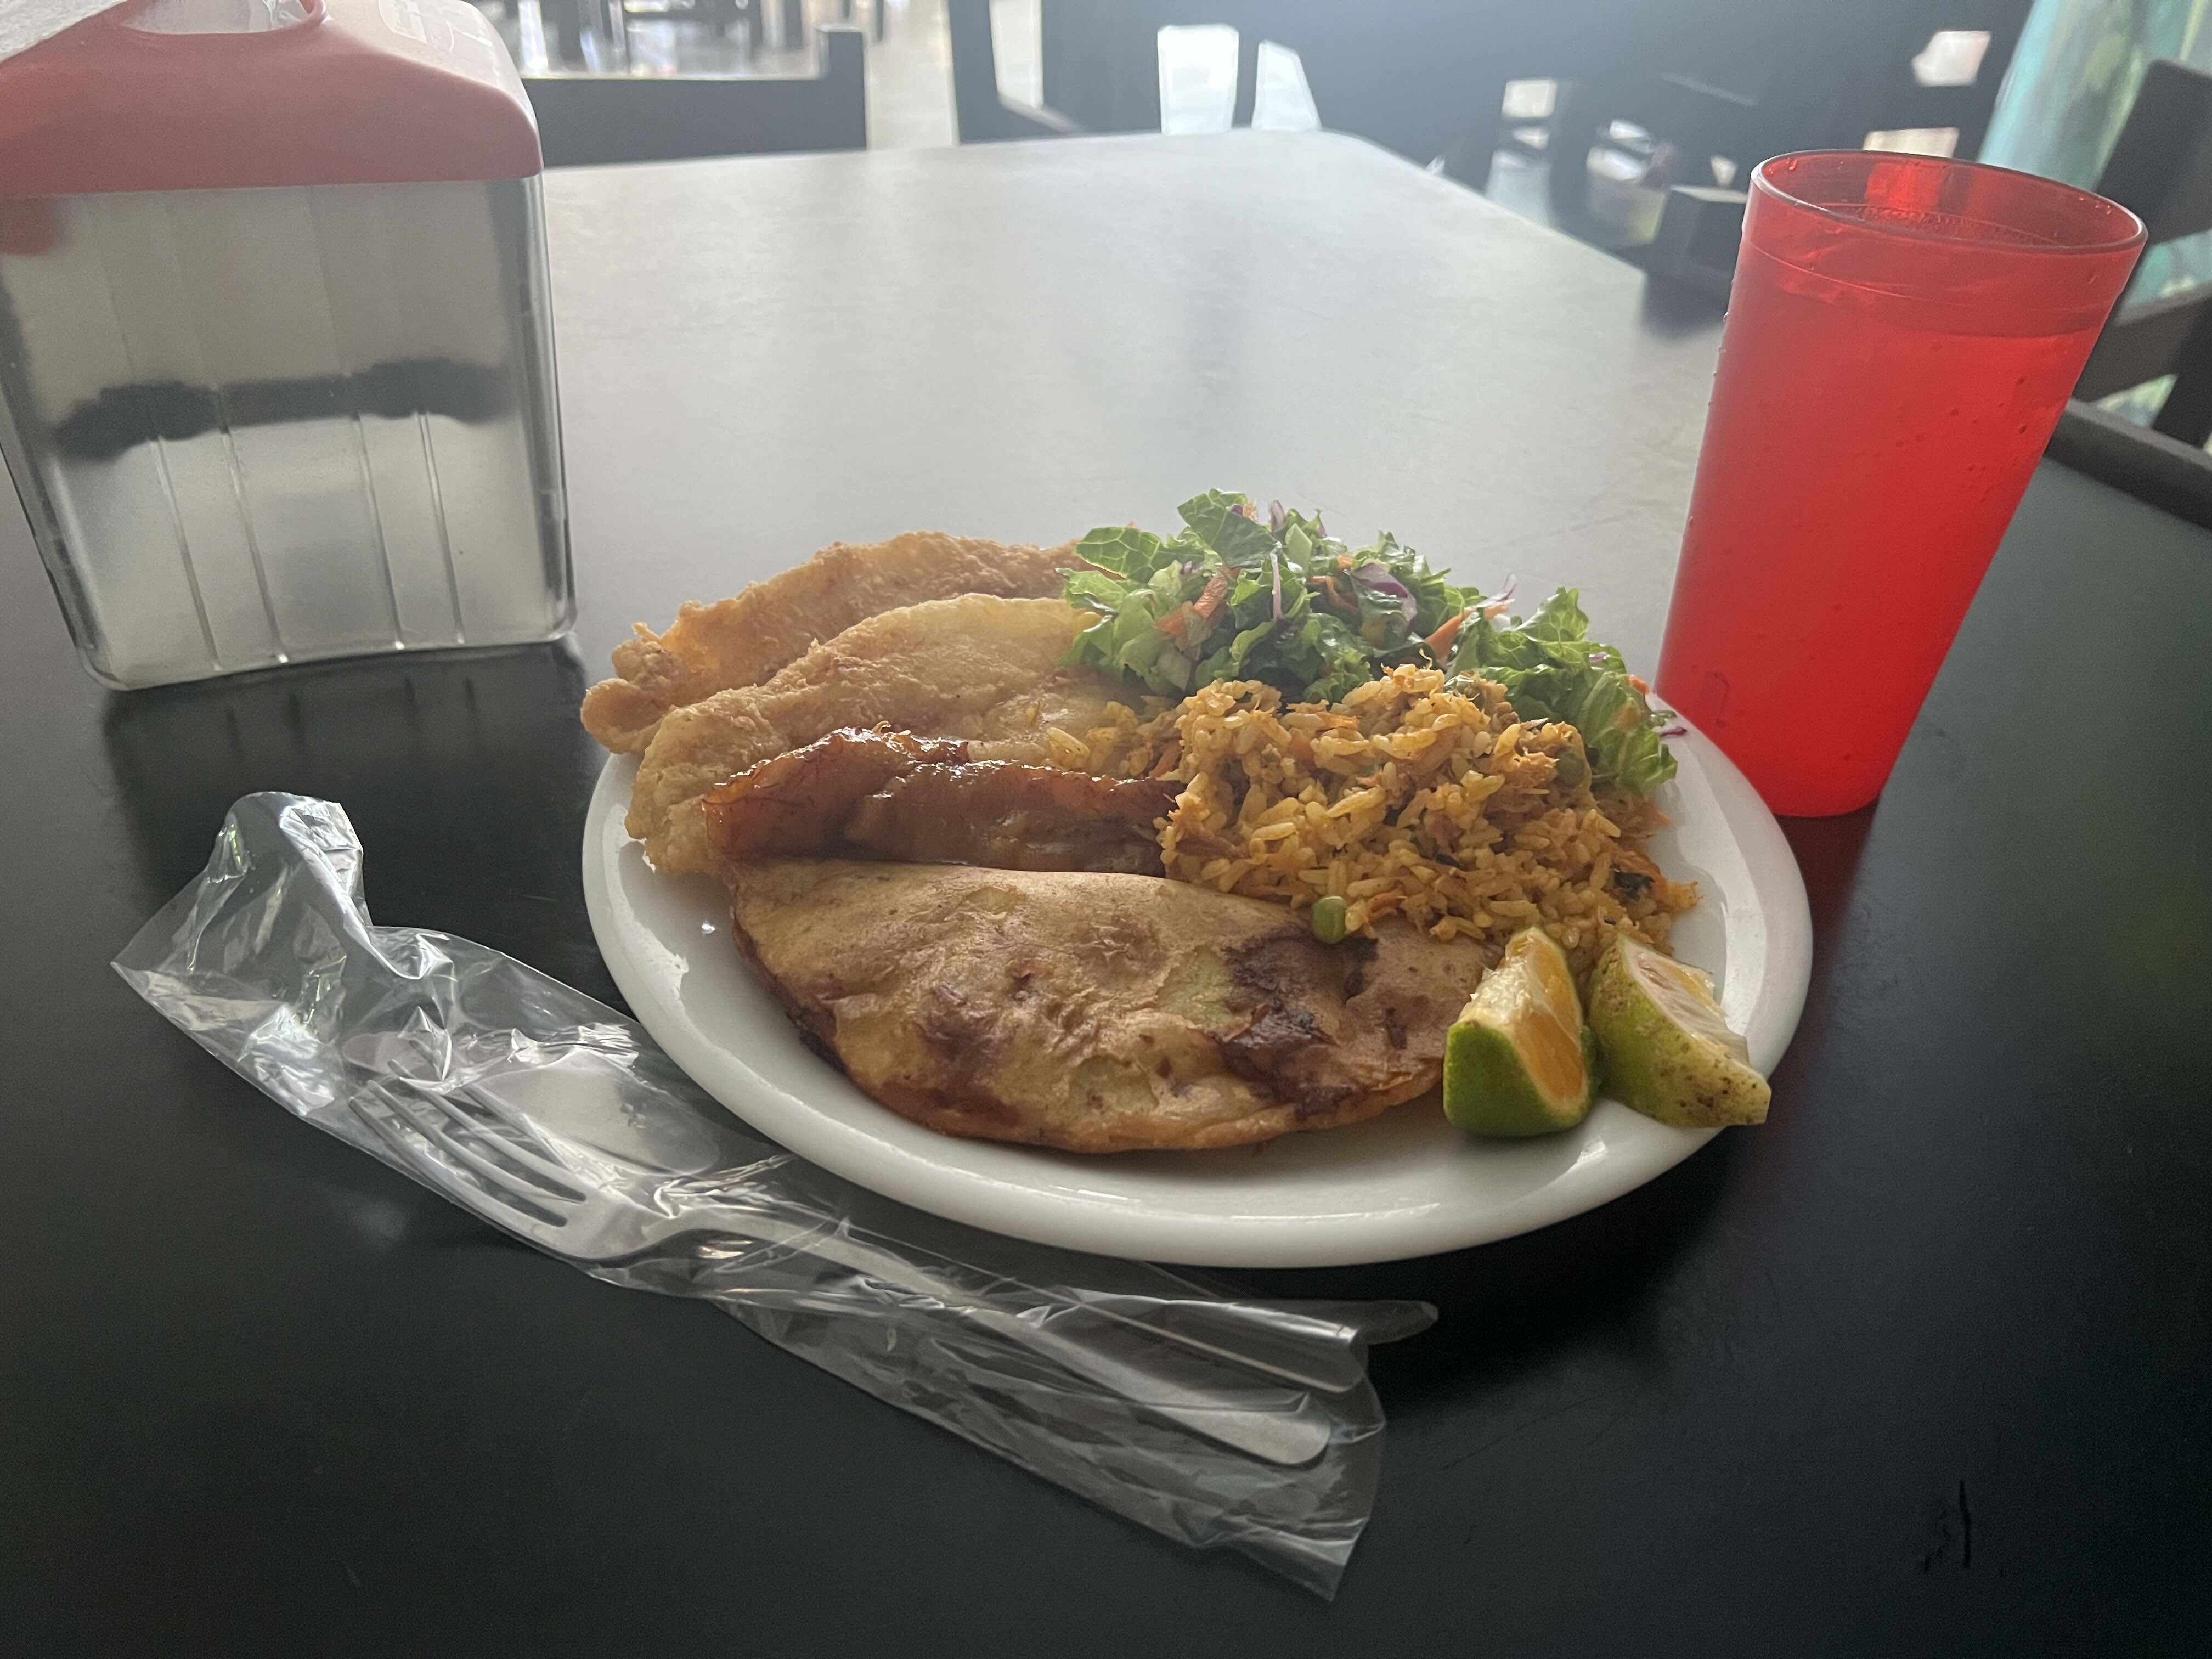 A plate of food in a simple soda restaurant